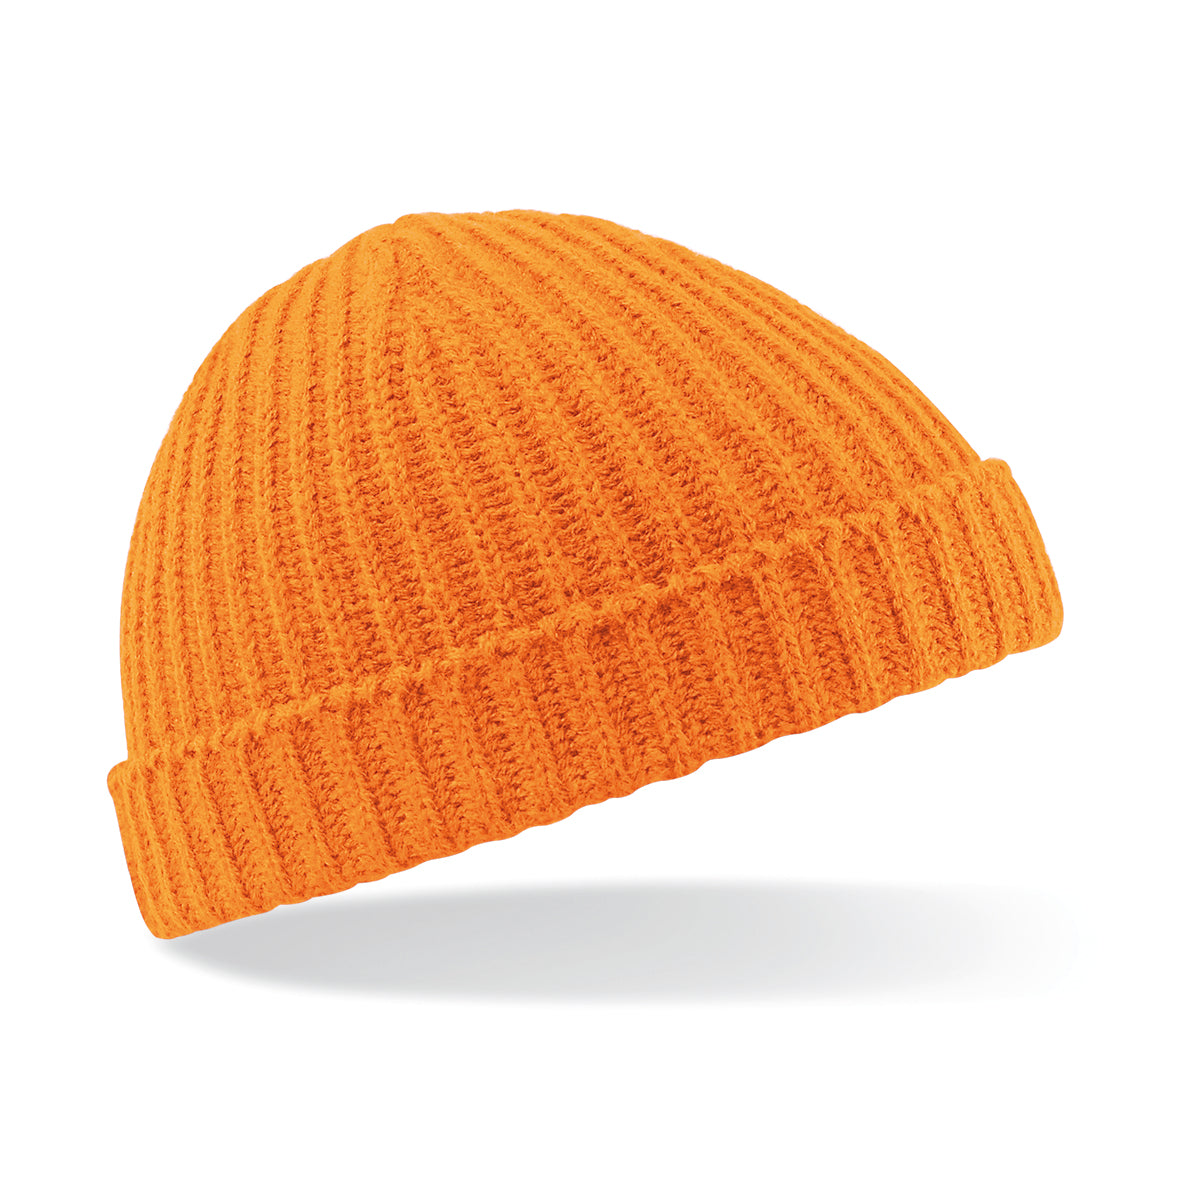 Trawler Beanie - Perfect for Commuting - Fisherman Hat - Fashionable hat - Available for Embroidery